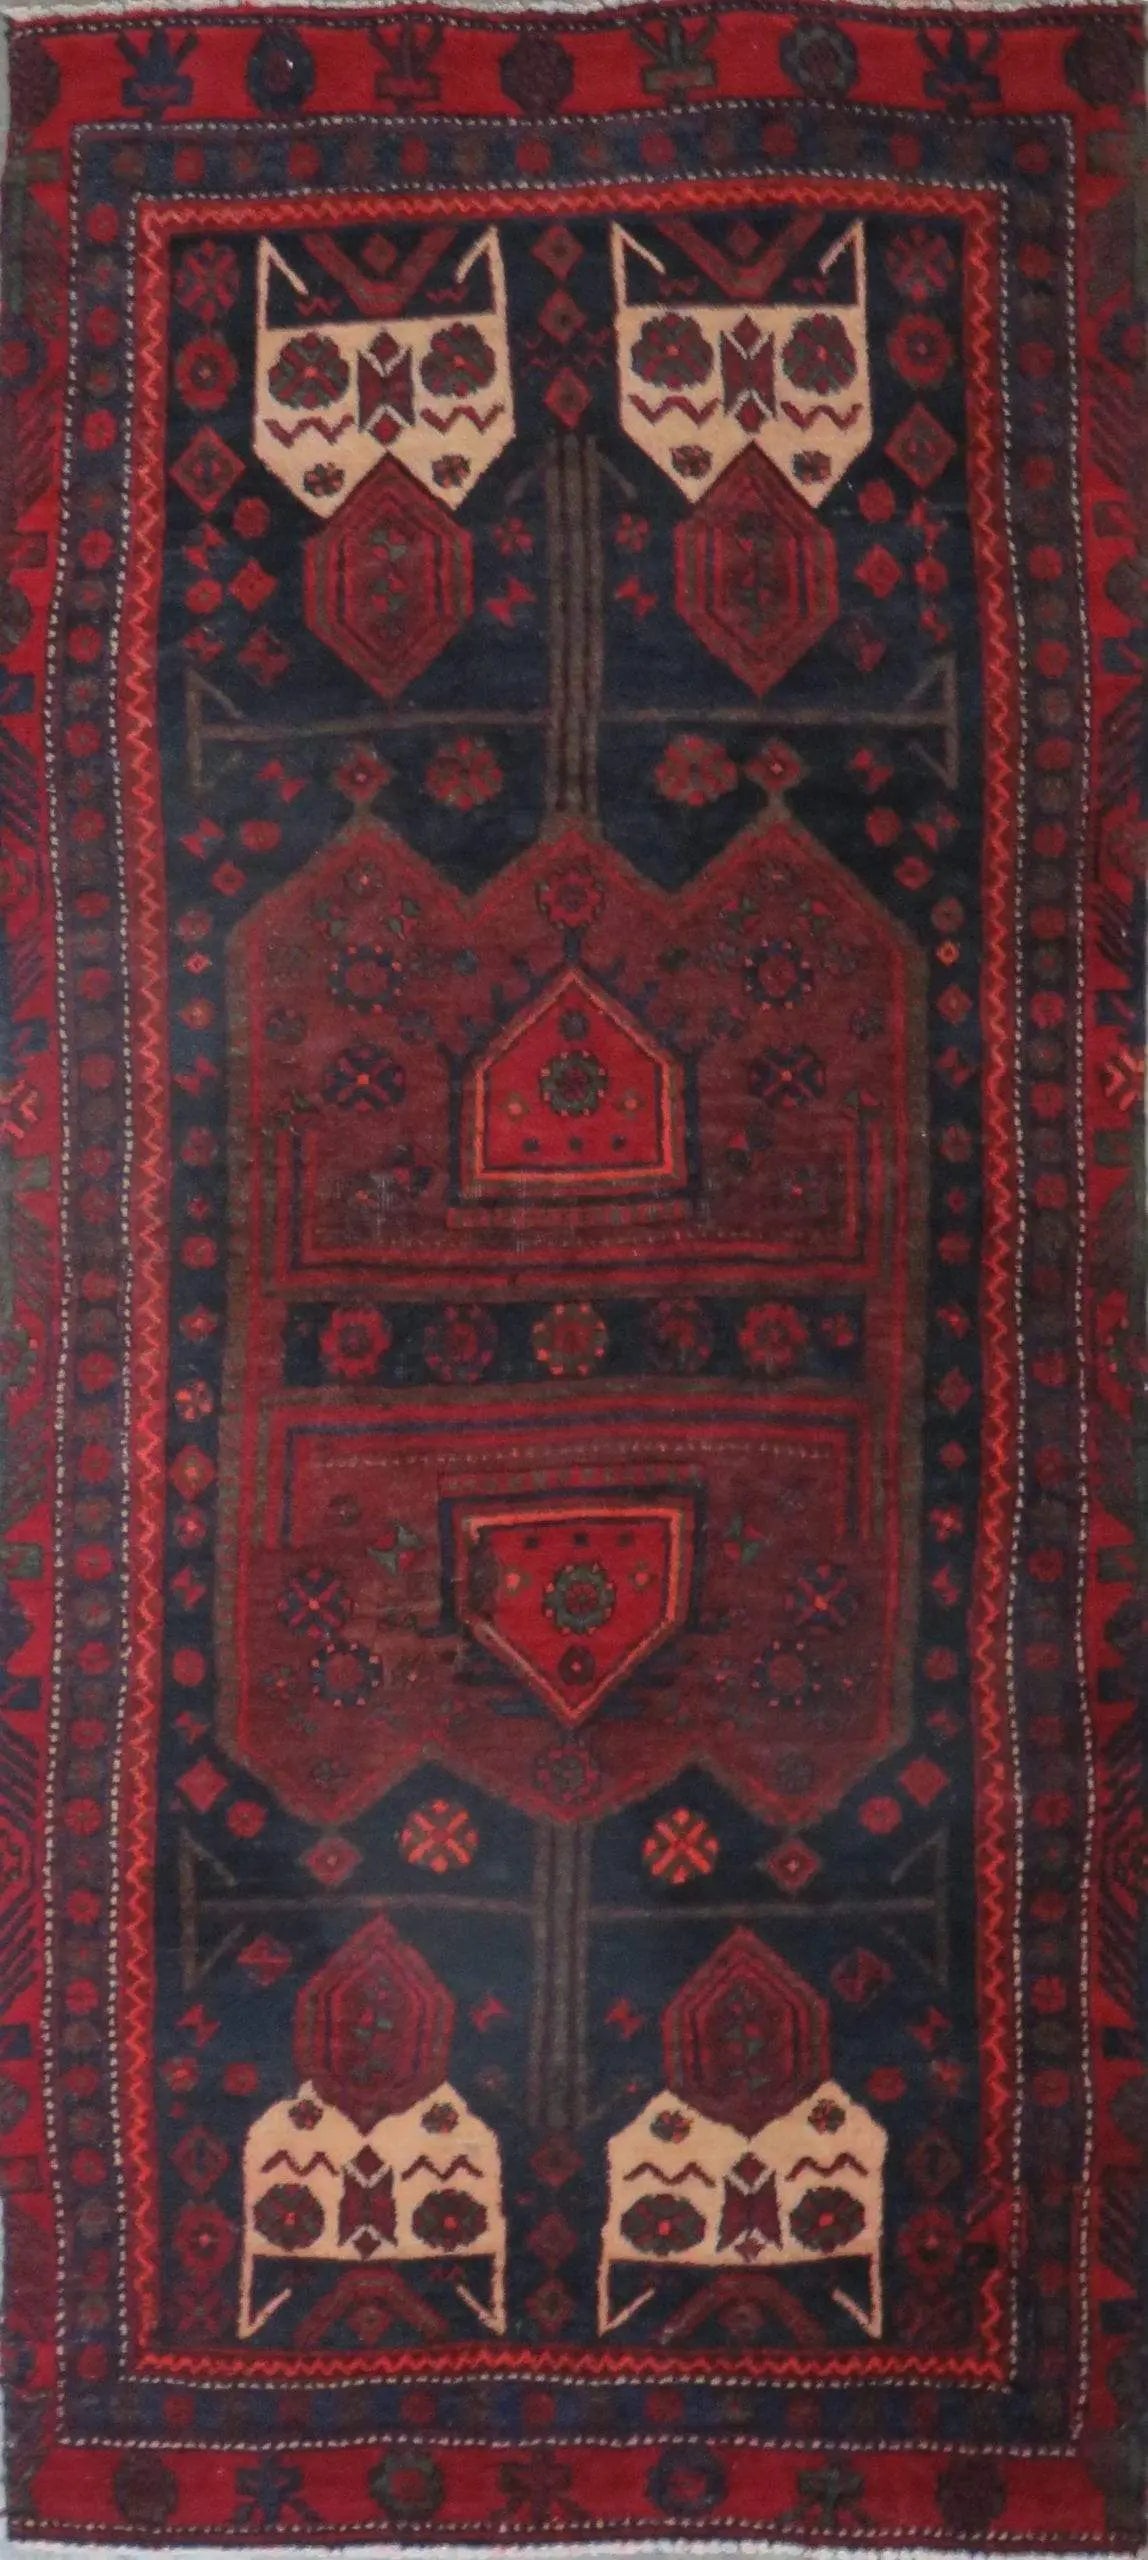 Hand-Knotted Persian Wool Rug _ Luxurious Vintage Design, 7'2" x 2'10, Artisan Crafted